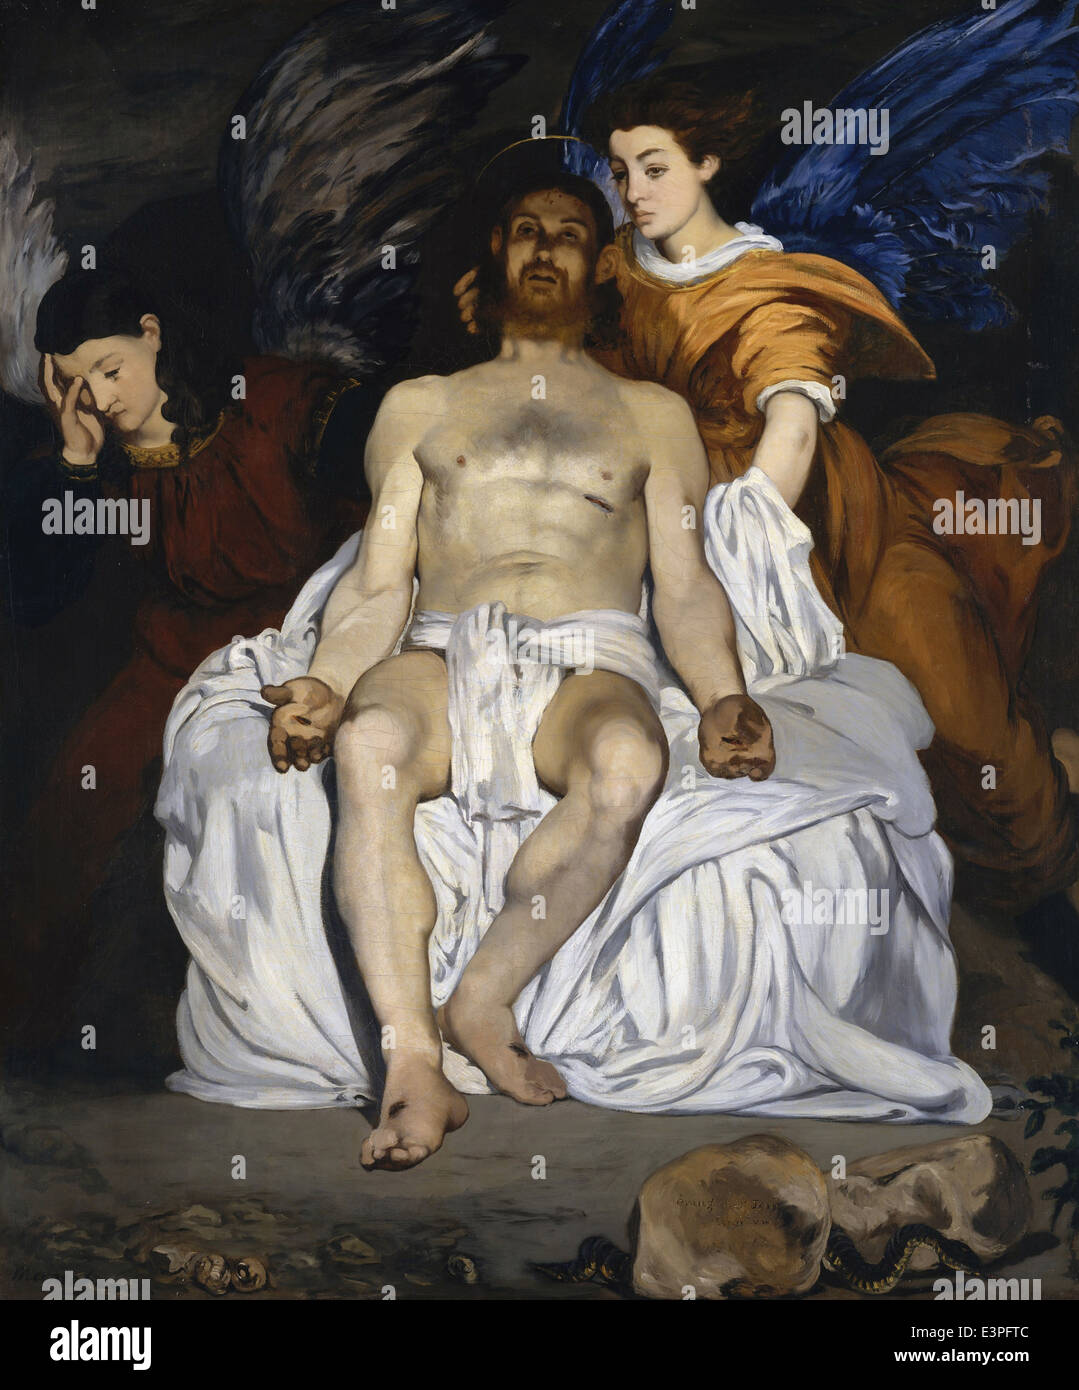 Édouard Manet - The Dead Christ with Angels - 1864 - MET Museum - New-York Stock Photo